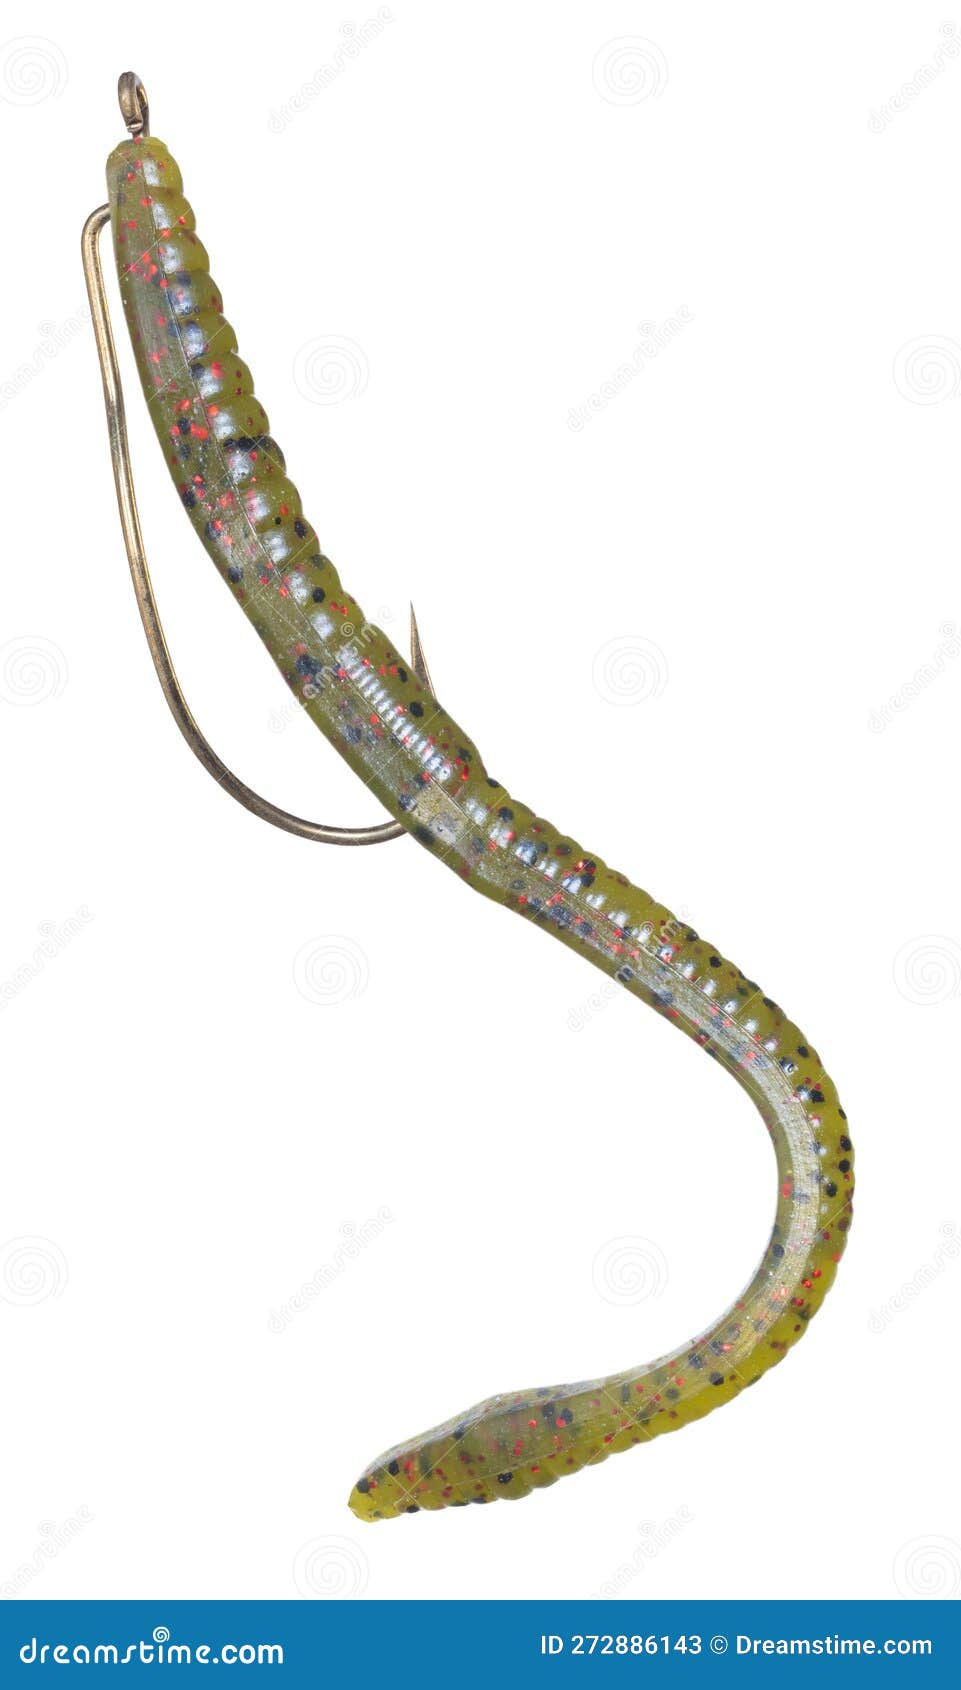 https://thumbs.dreamstime.com/z/light-brown-rubber-fishing-worm-rigged-up-to-be-weedless-hook-light-brown-plastic-fishing-worm-hook-272886143.jpg